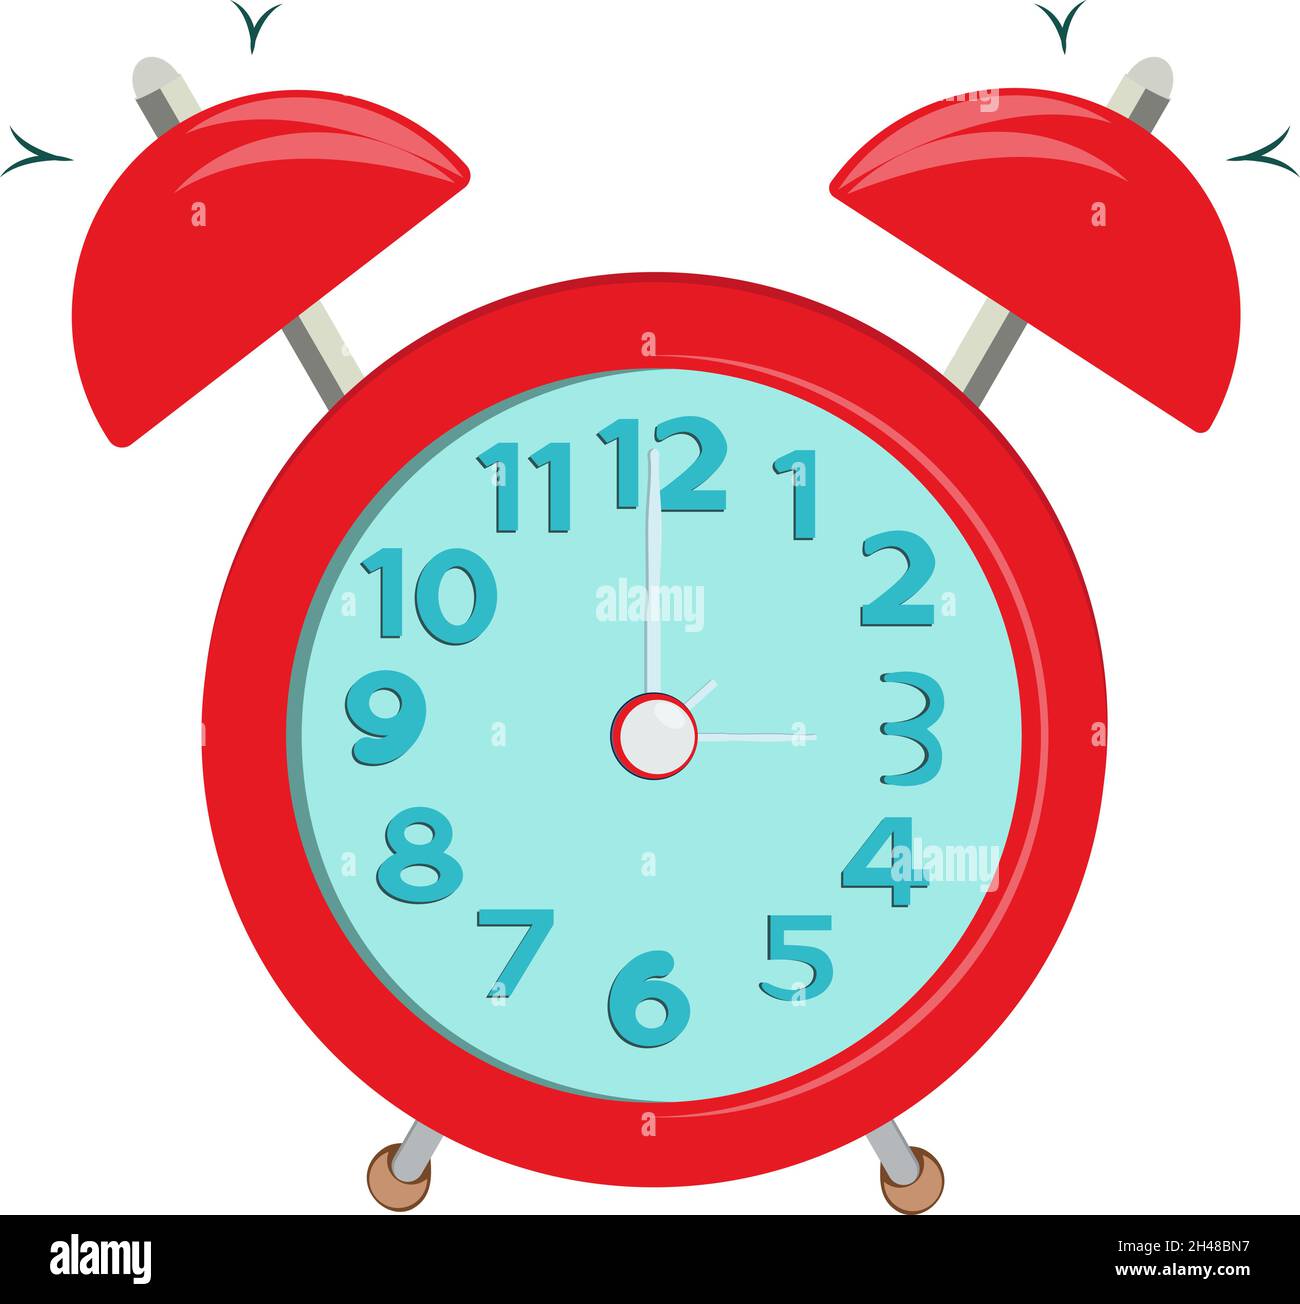 Alarm clock, illustration, vector on a white background. Stock Vector